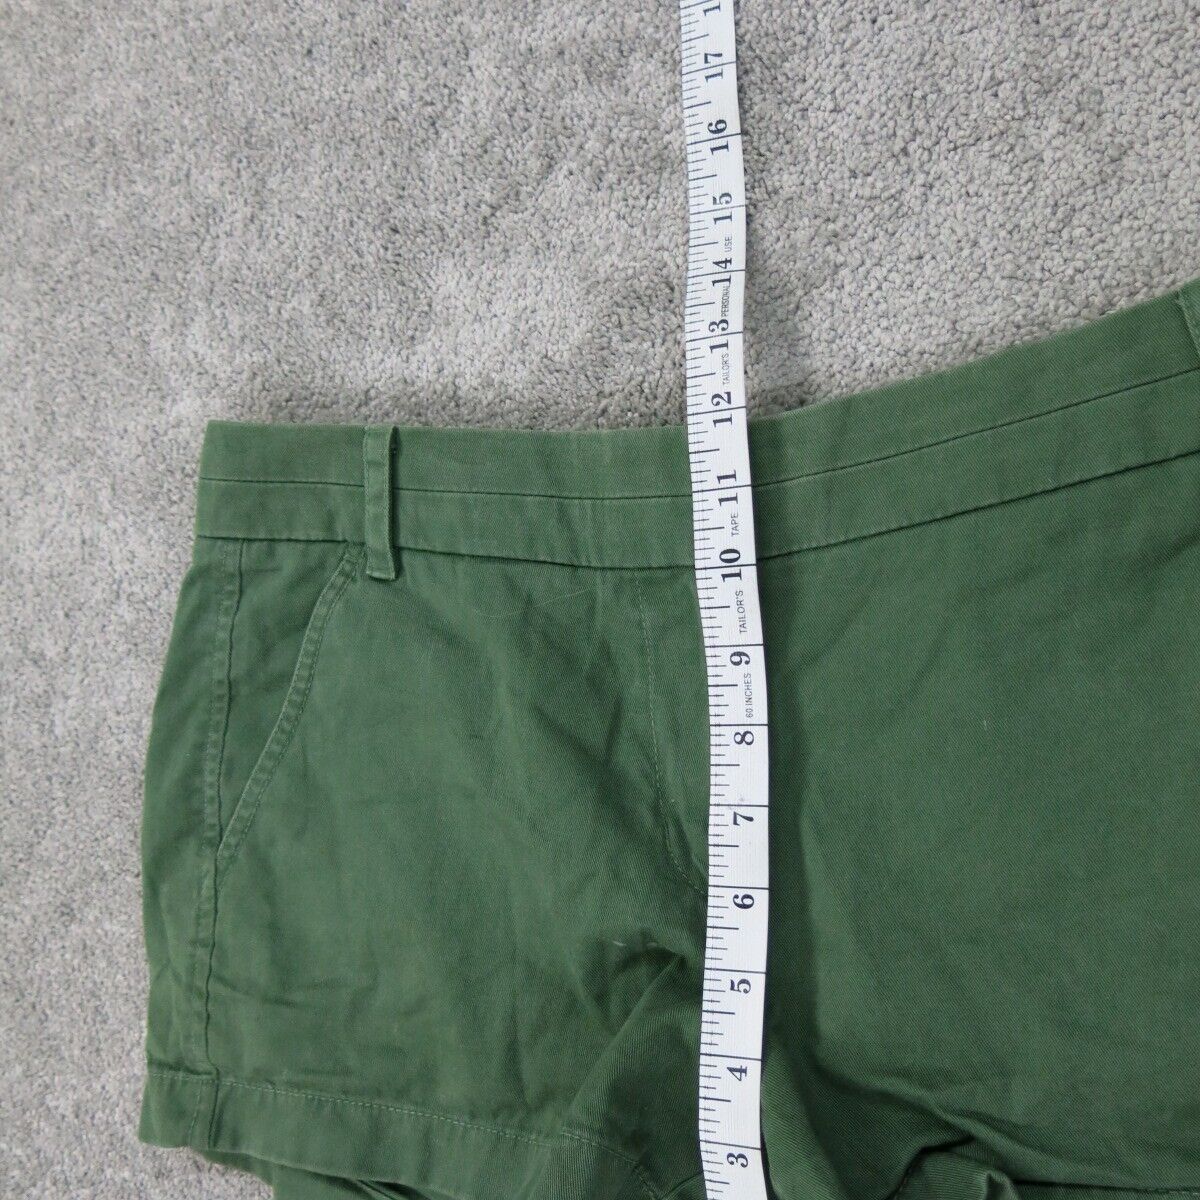 J Crew Womens Slim Fit Super Stretch Chino Shorts Mid Rise Green Size 8